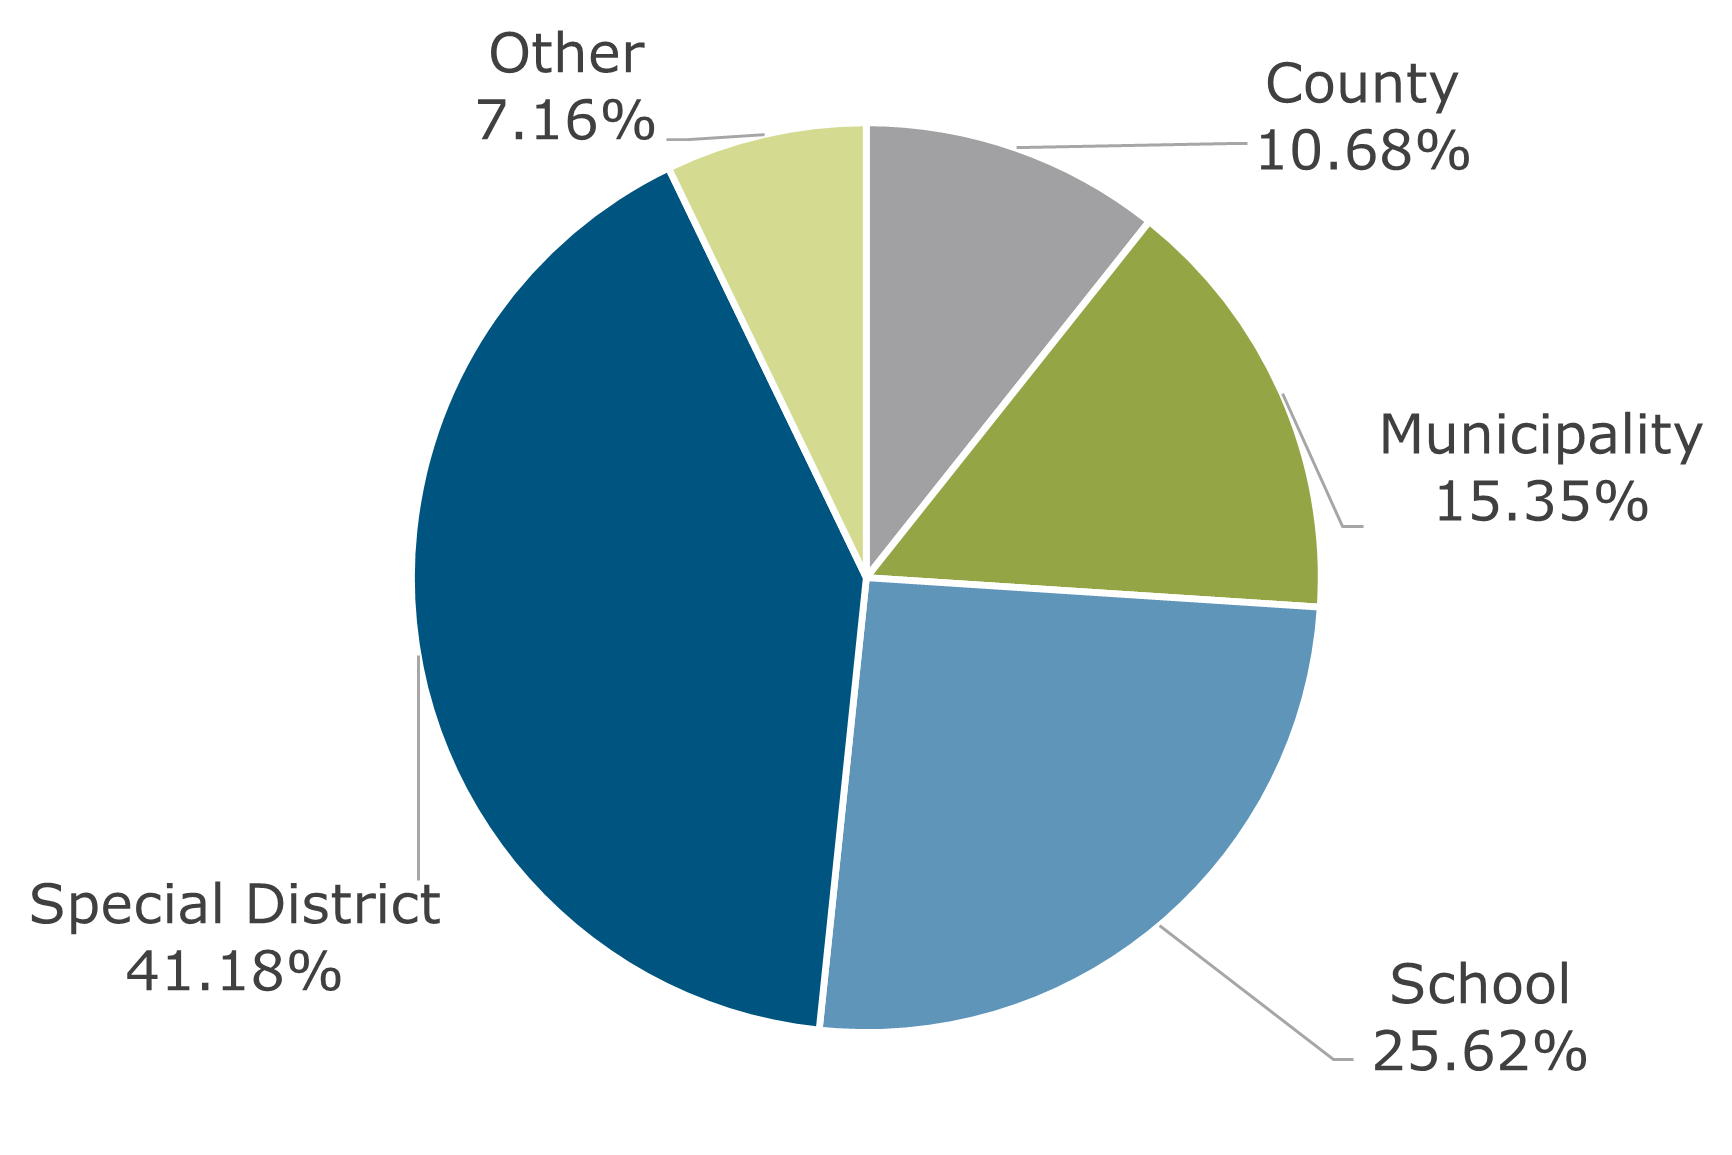 03.23 - Texas CLASS Participant Breakdown by Type